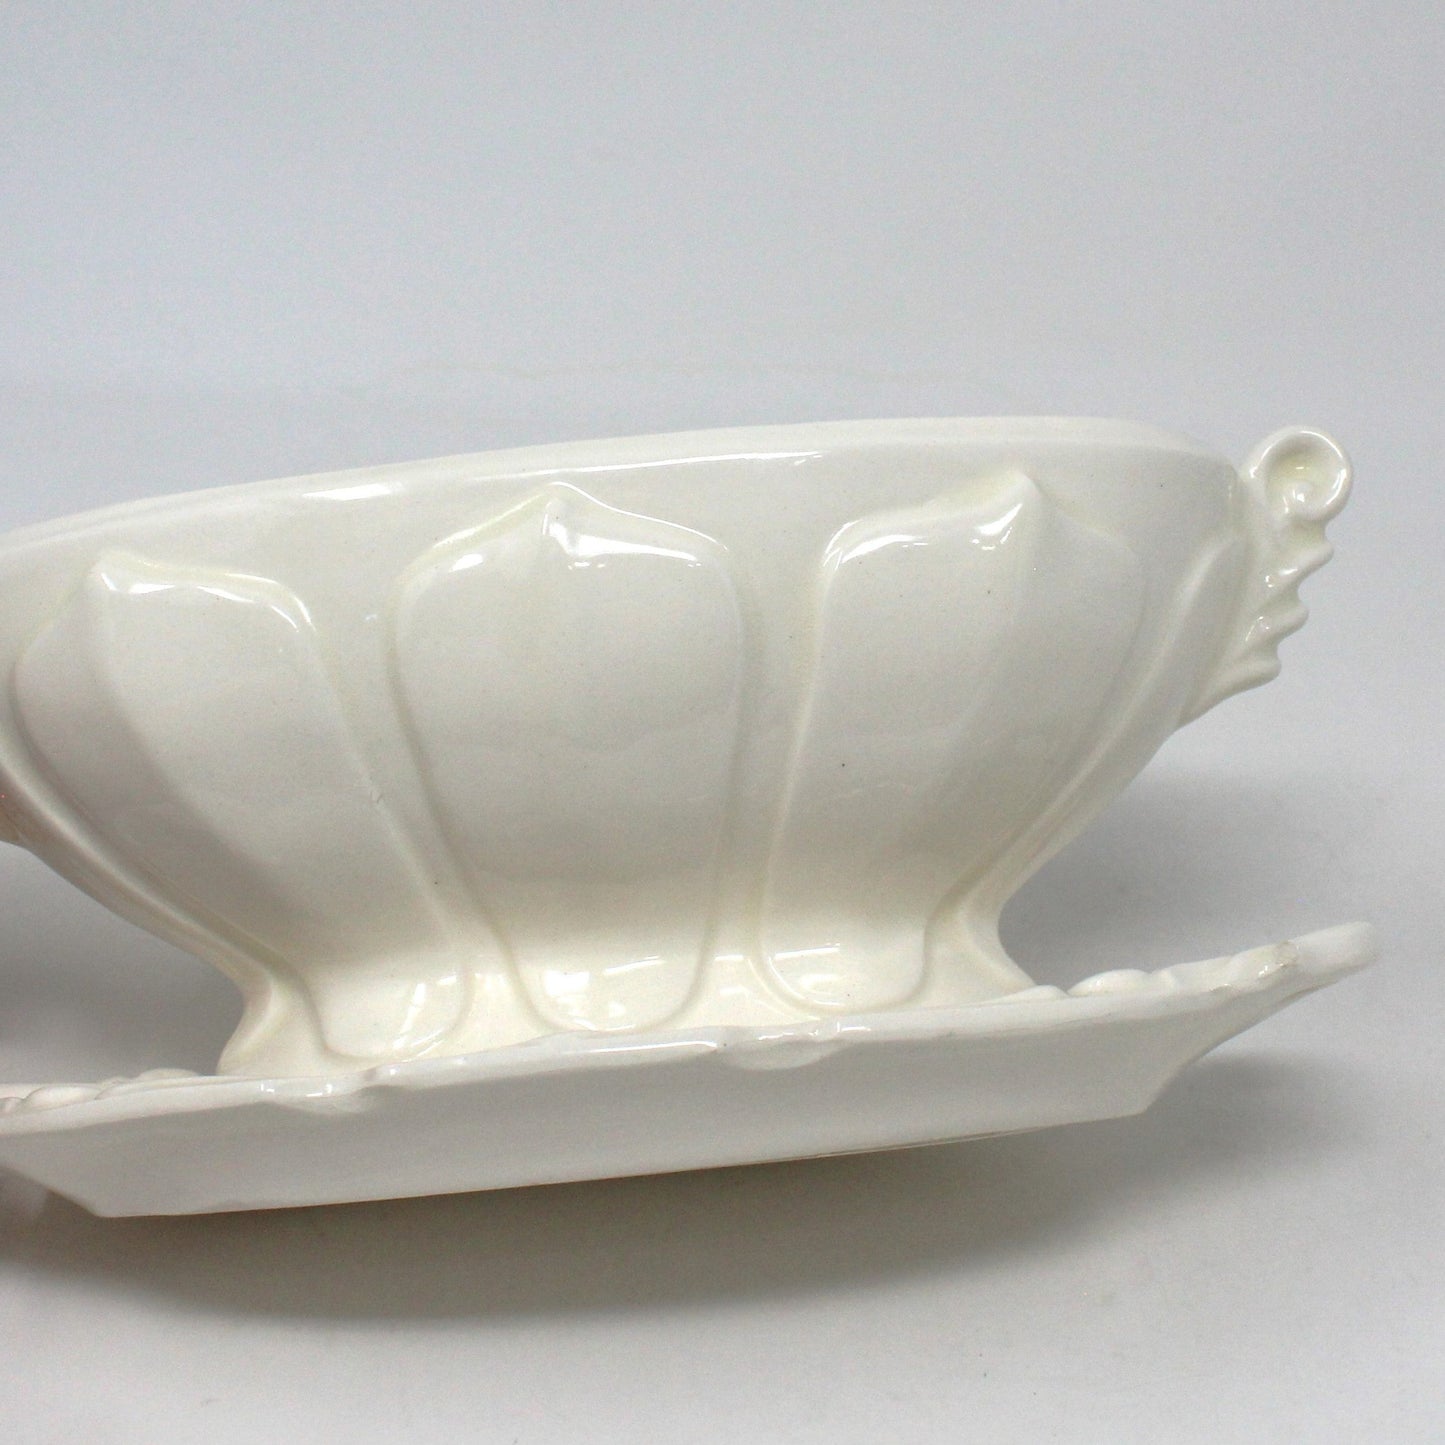 Gravy Boat / Saucière with Underplate, Lid and Ladle, Feathers, Ceramic, Vintage